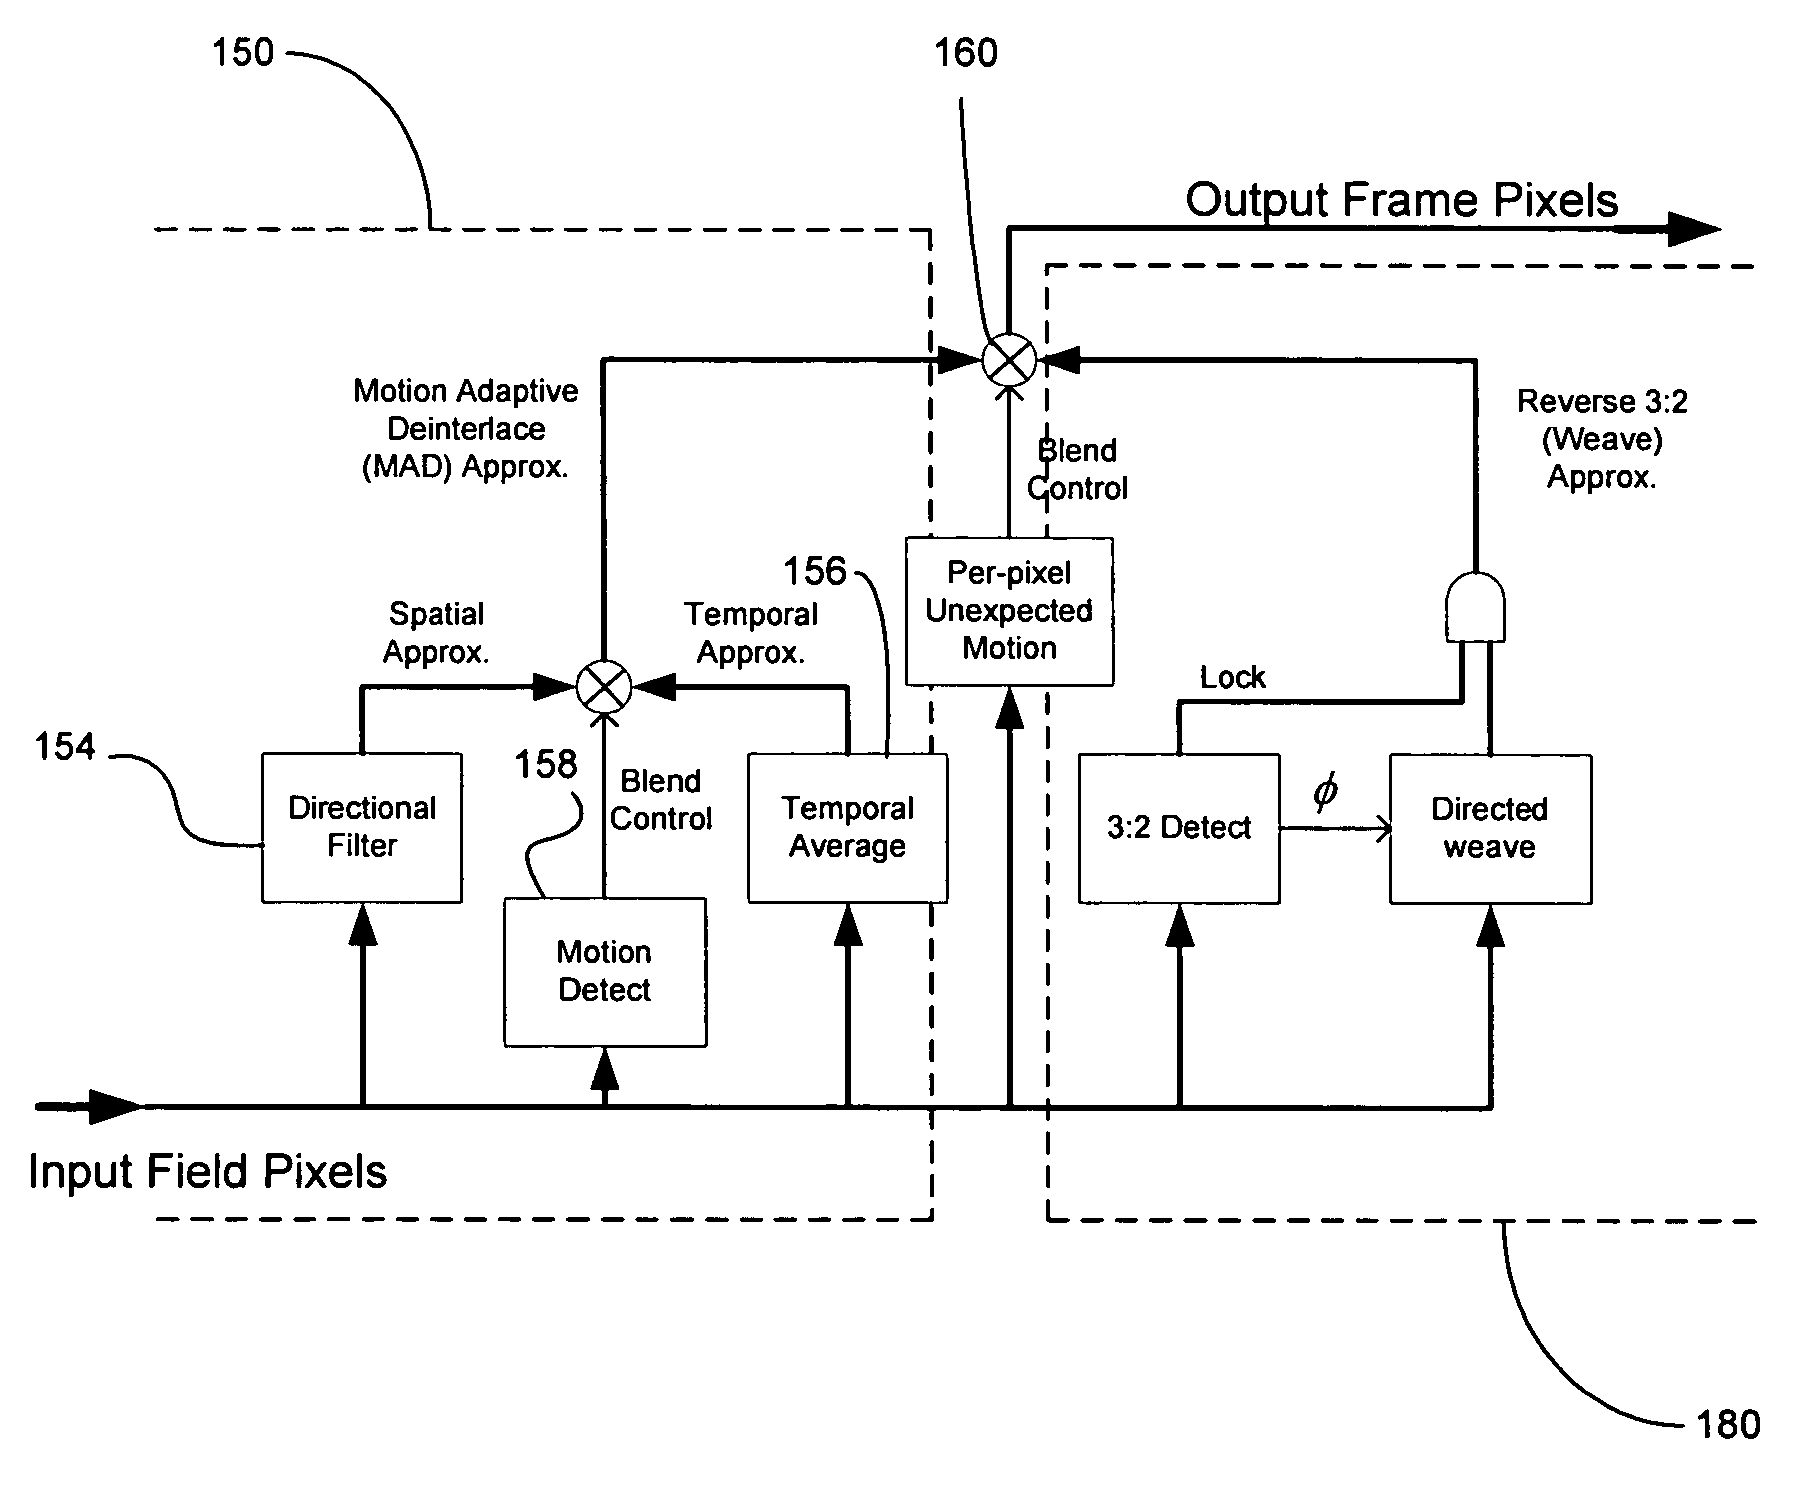 Method and system for motion adaptive deinterlacer with integrated directional filter